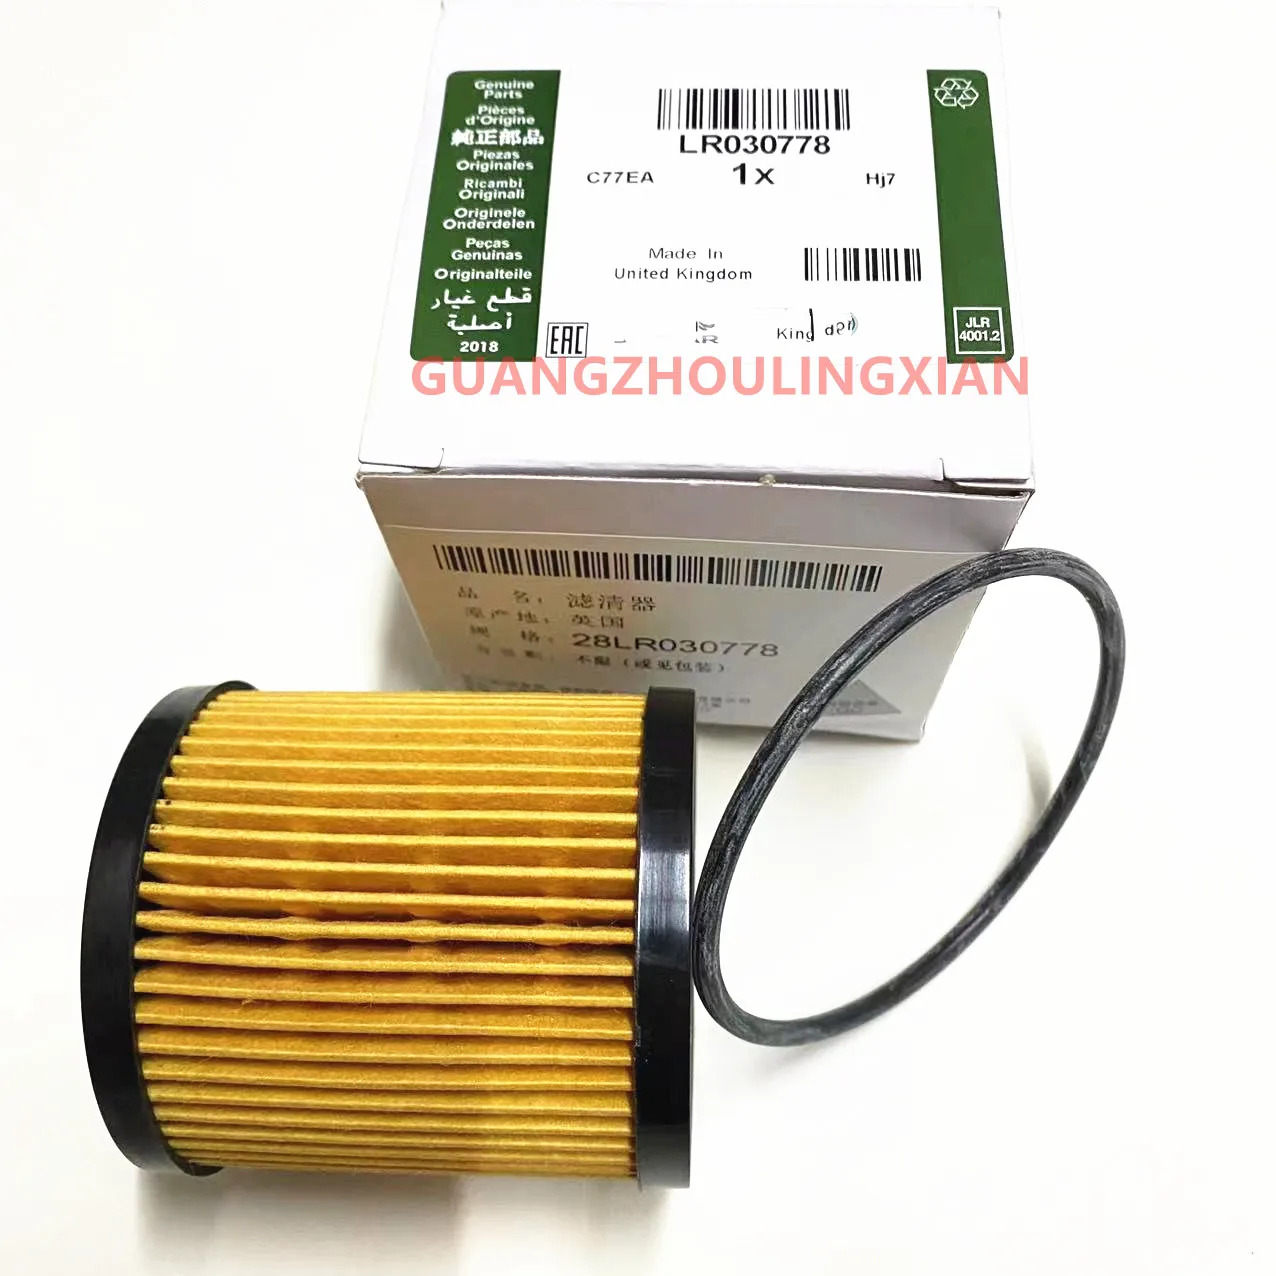 SINGLE TURBO OIL FILTER WITH SEAL FOR LAND ROVER RANGE ROVER LR001247 LR030778